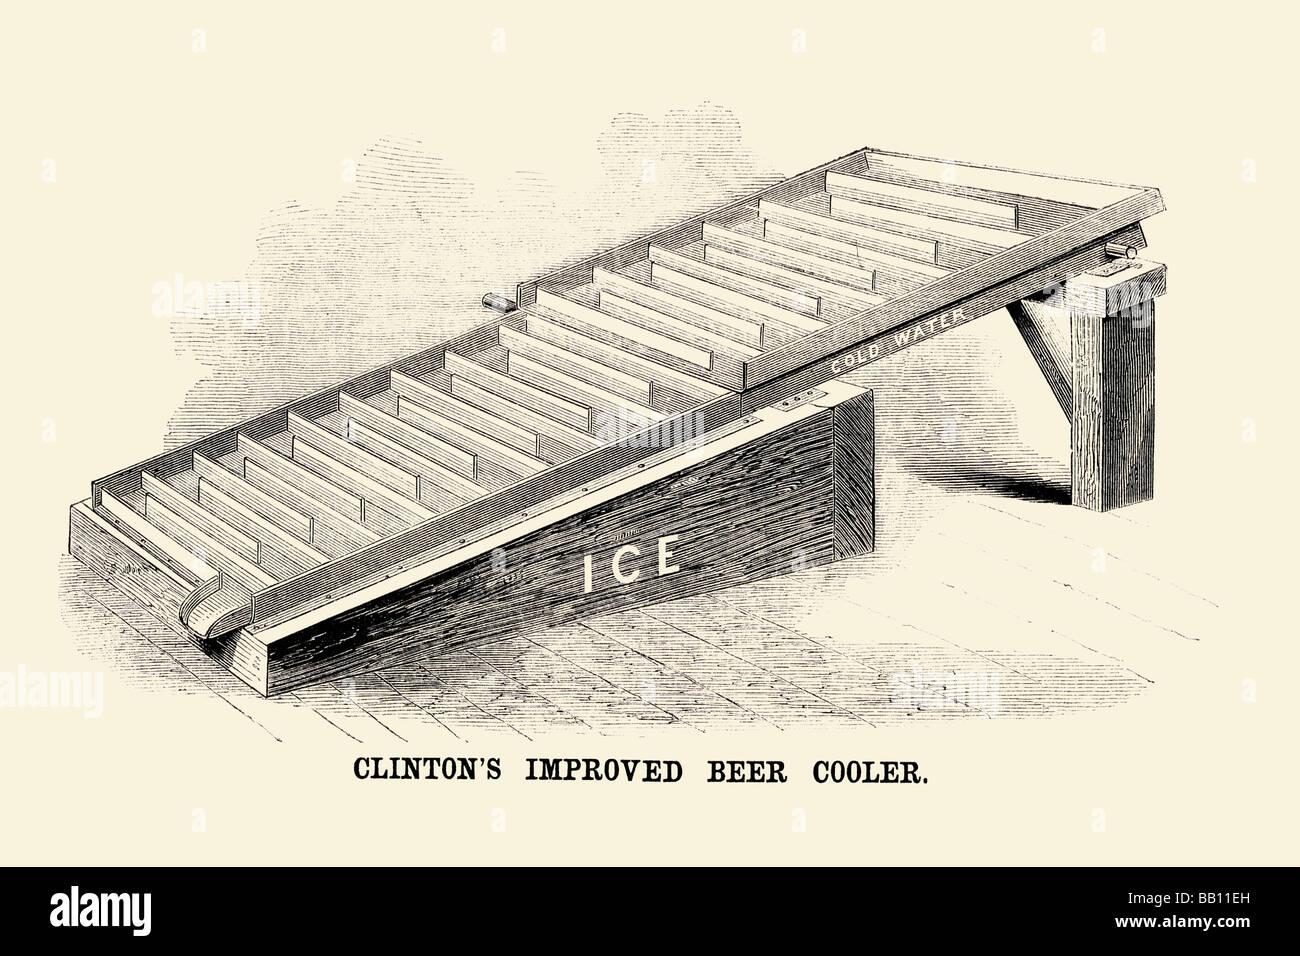 Clinton's Improved Beer Cooler Stock Photo